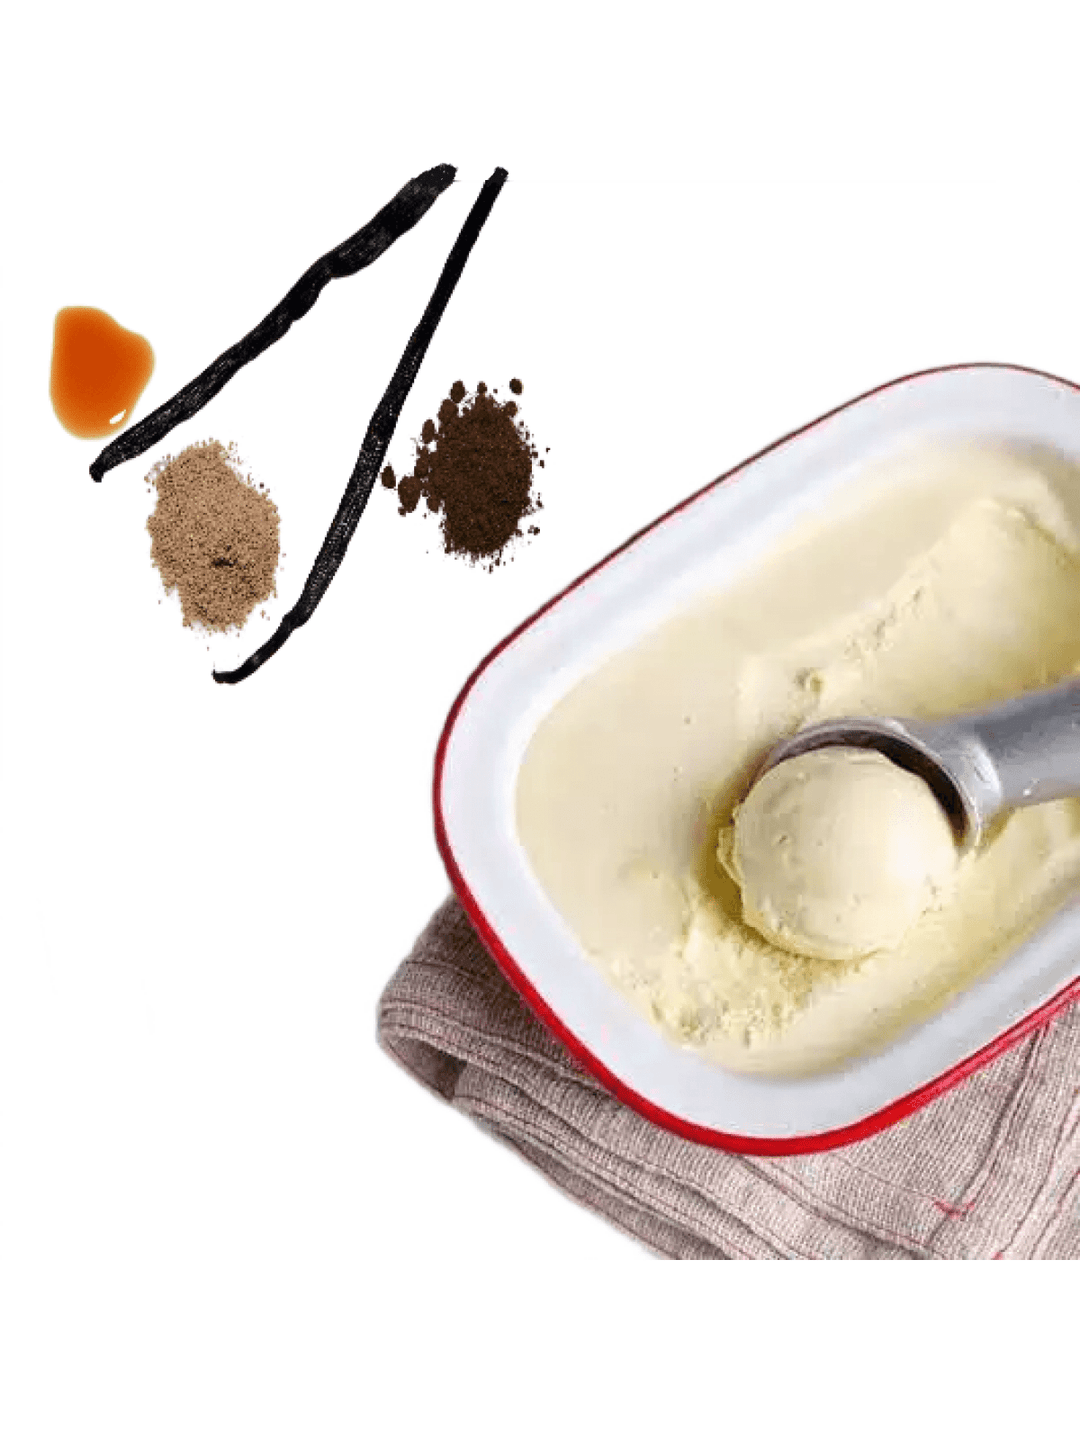 Co-op Pricing Ugandan Gourmet Ground Vanilla Bean Powder (Per Ounce)<br><br>Minimum Order quantity for this Co-op price is 2 ounces